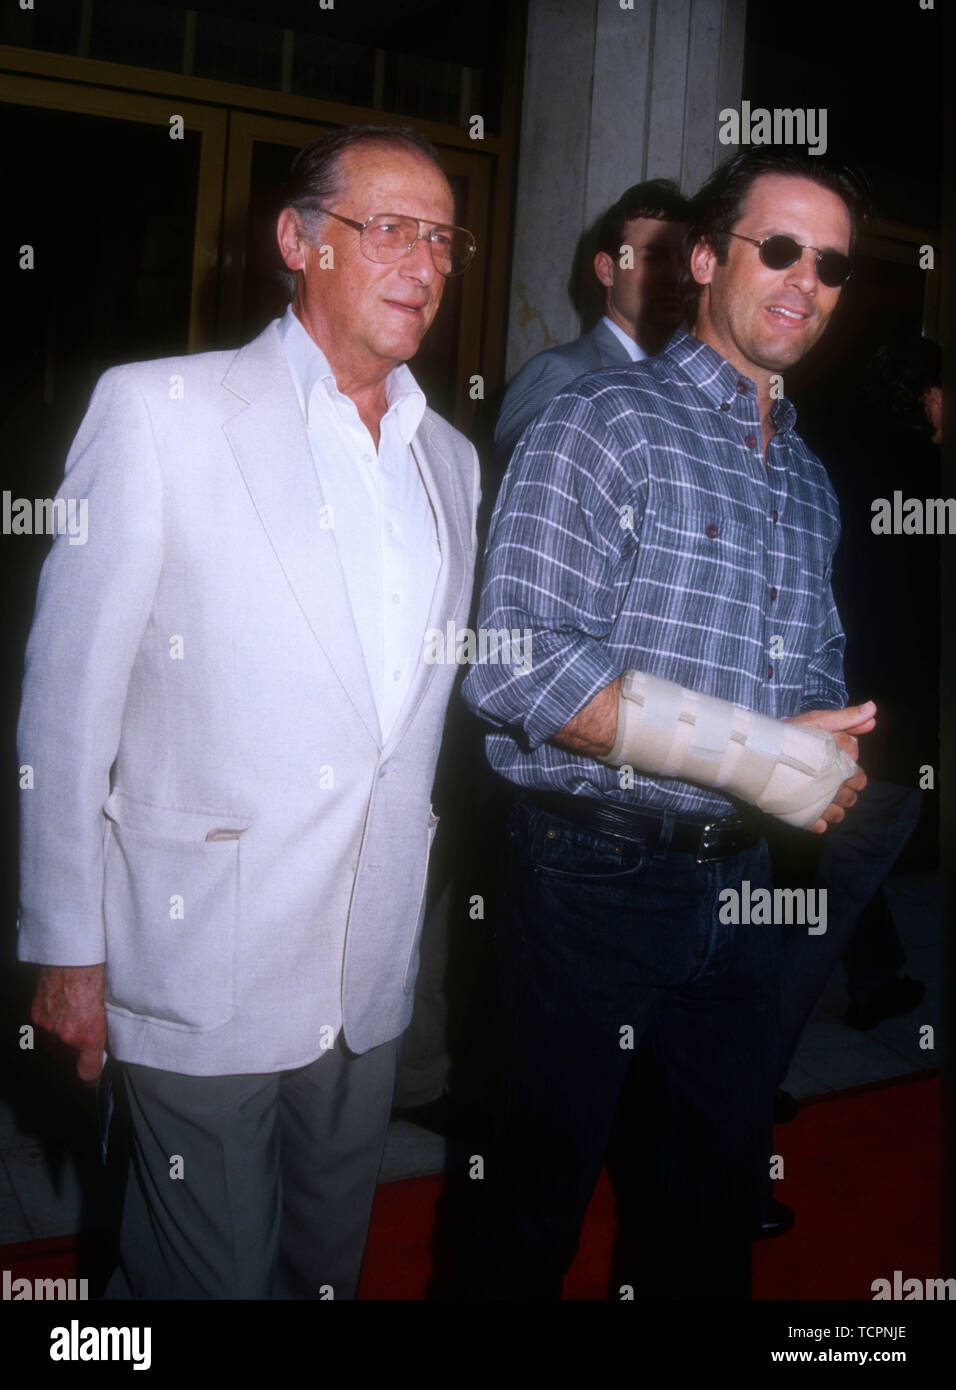 Westwood, California, USA 28th June 1994 Actor Hart Bochner and father Lloyd Bochner attend the premiere of 'Blown Away' on June 28, 1994 at Mann National Theater in Westwood, California, USA. Photo by Barry King/Alamy Stock Photo Stock Photo